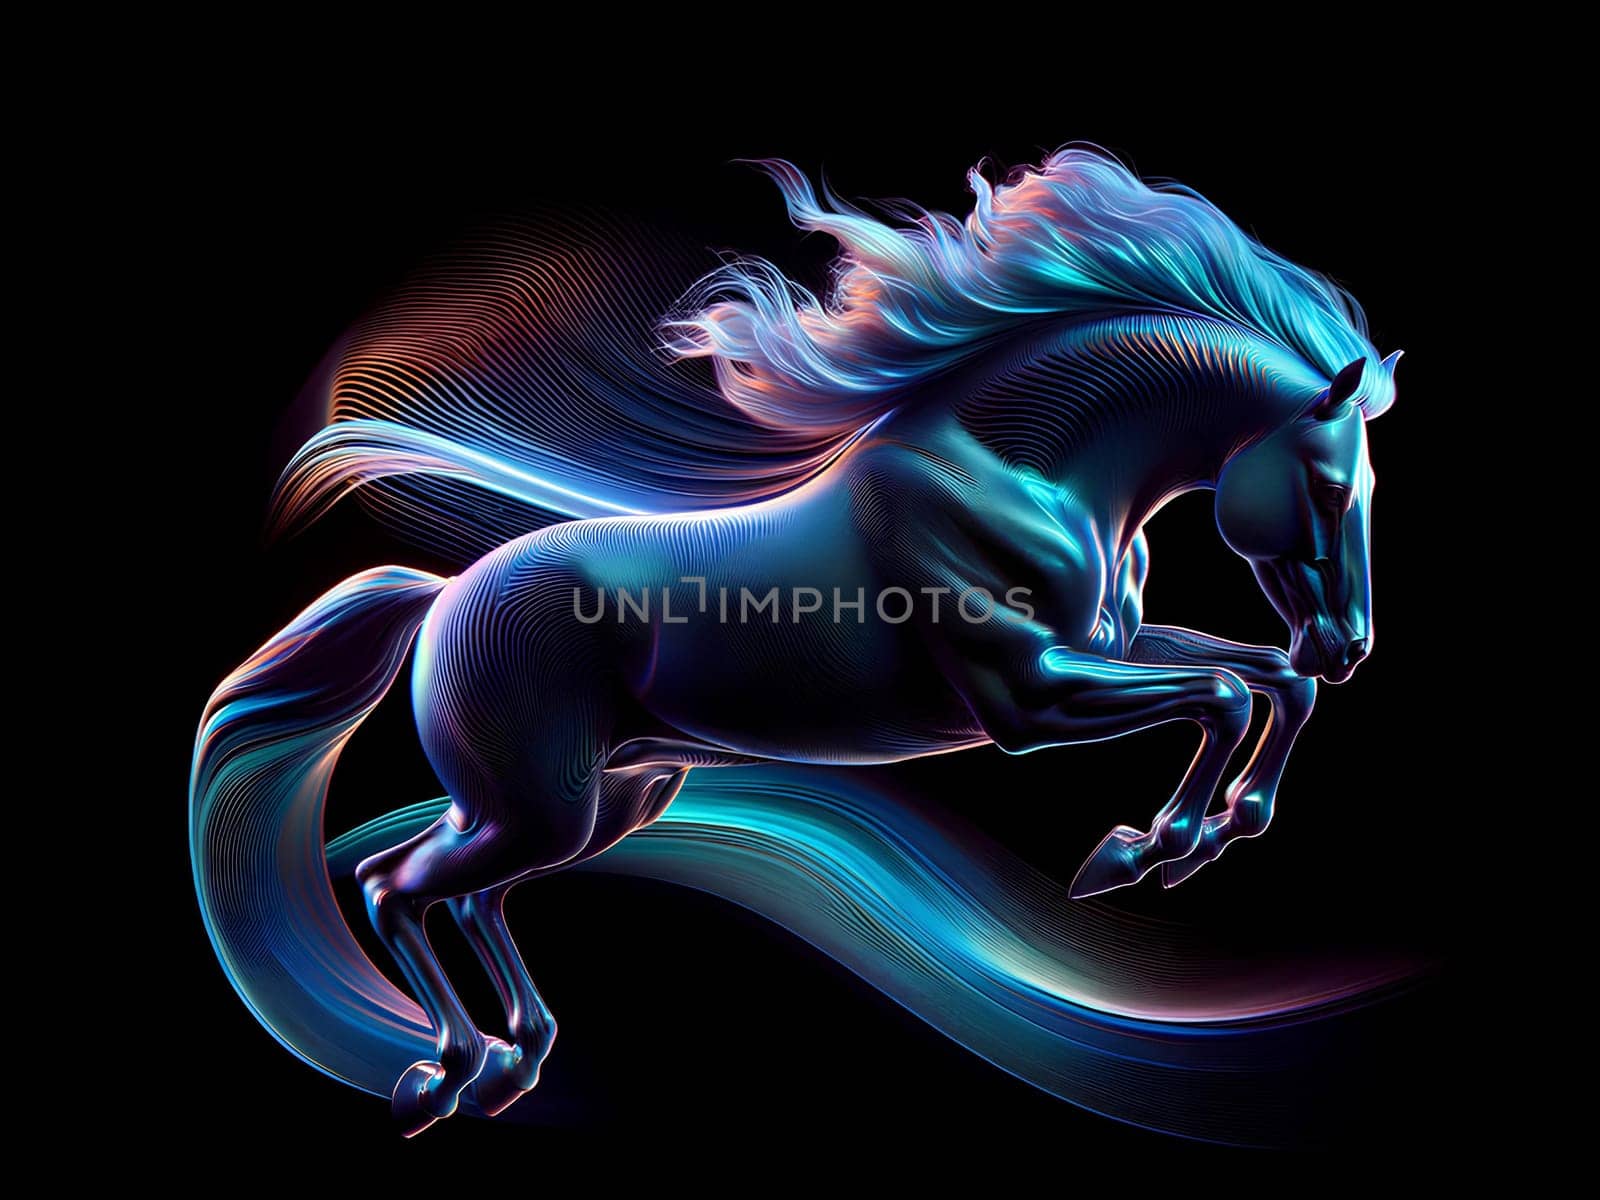 holographic glowing image of a galloping horse on a black background.